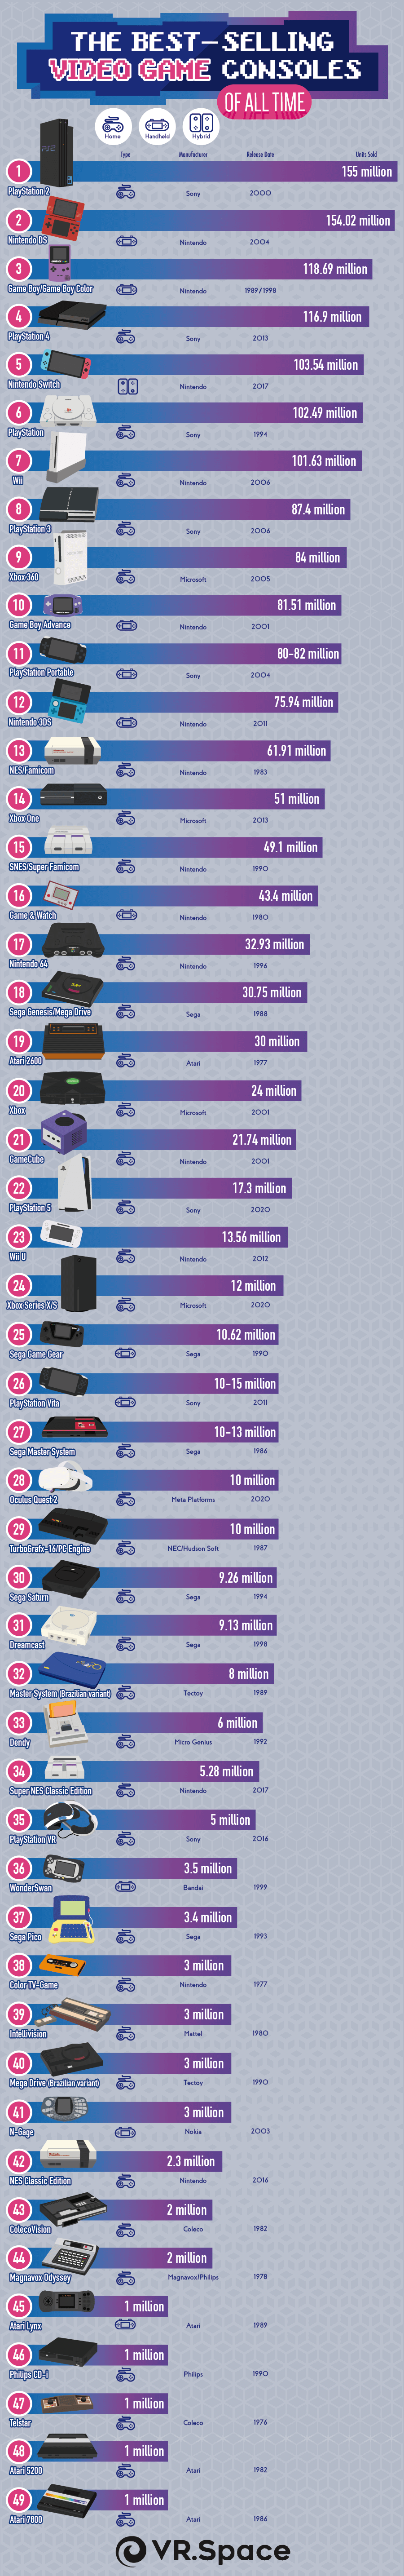 best-selling-video-game-consoles-2_virtual-reality